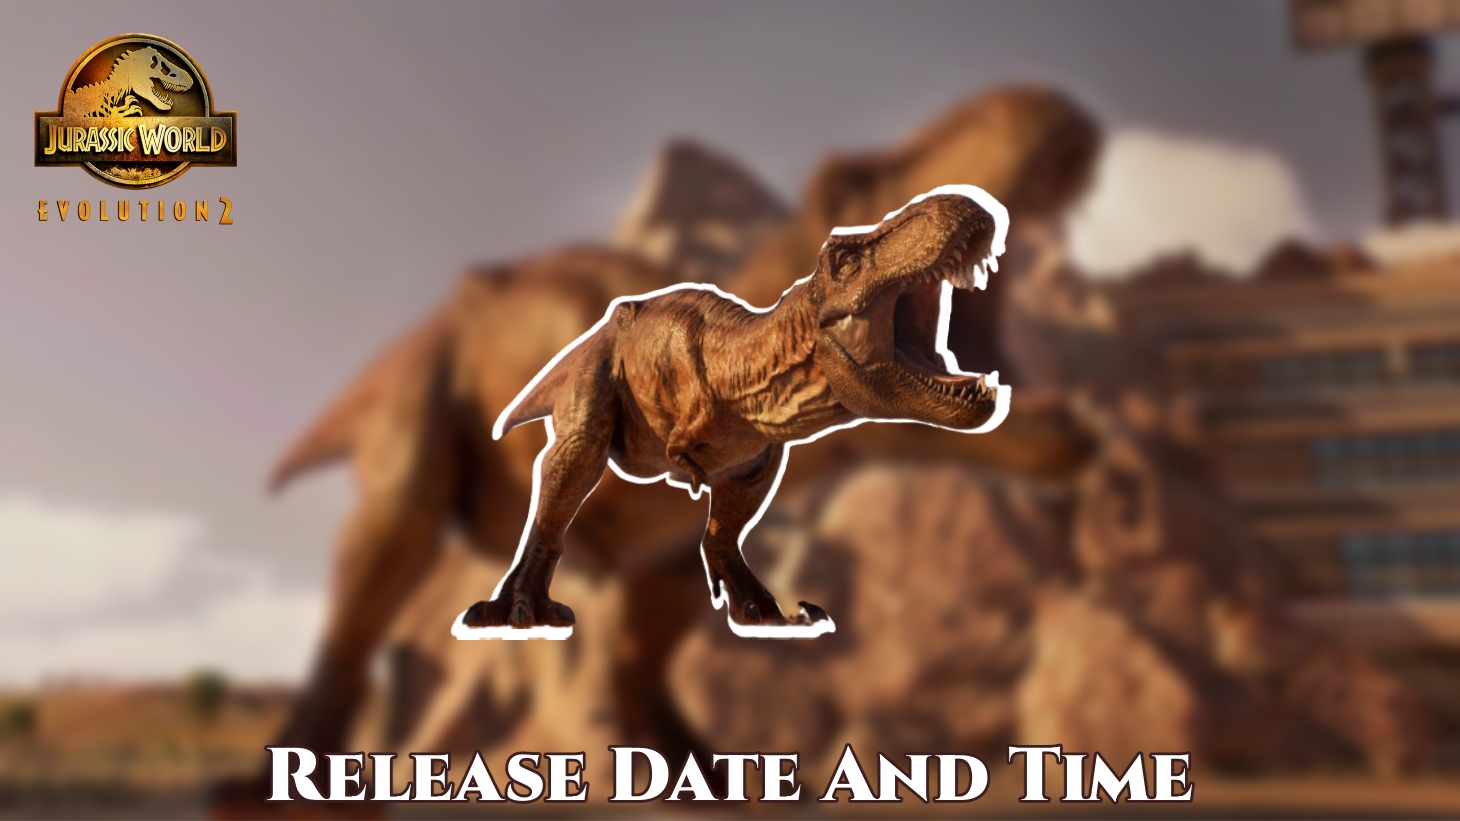 You are currently viewing Jurassic World Evolution 2 Release Date And Time